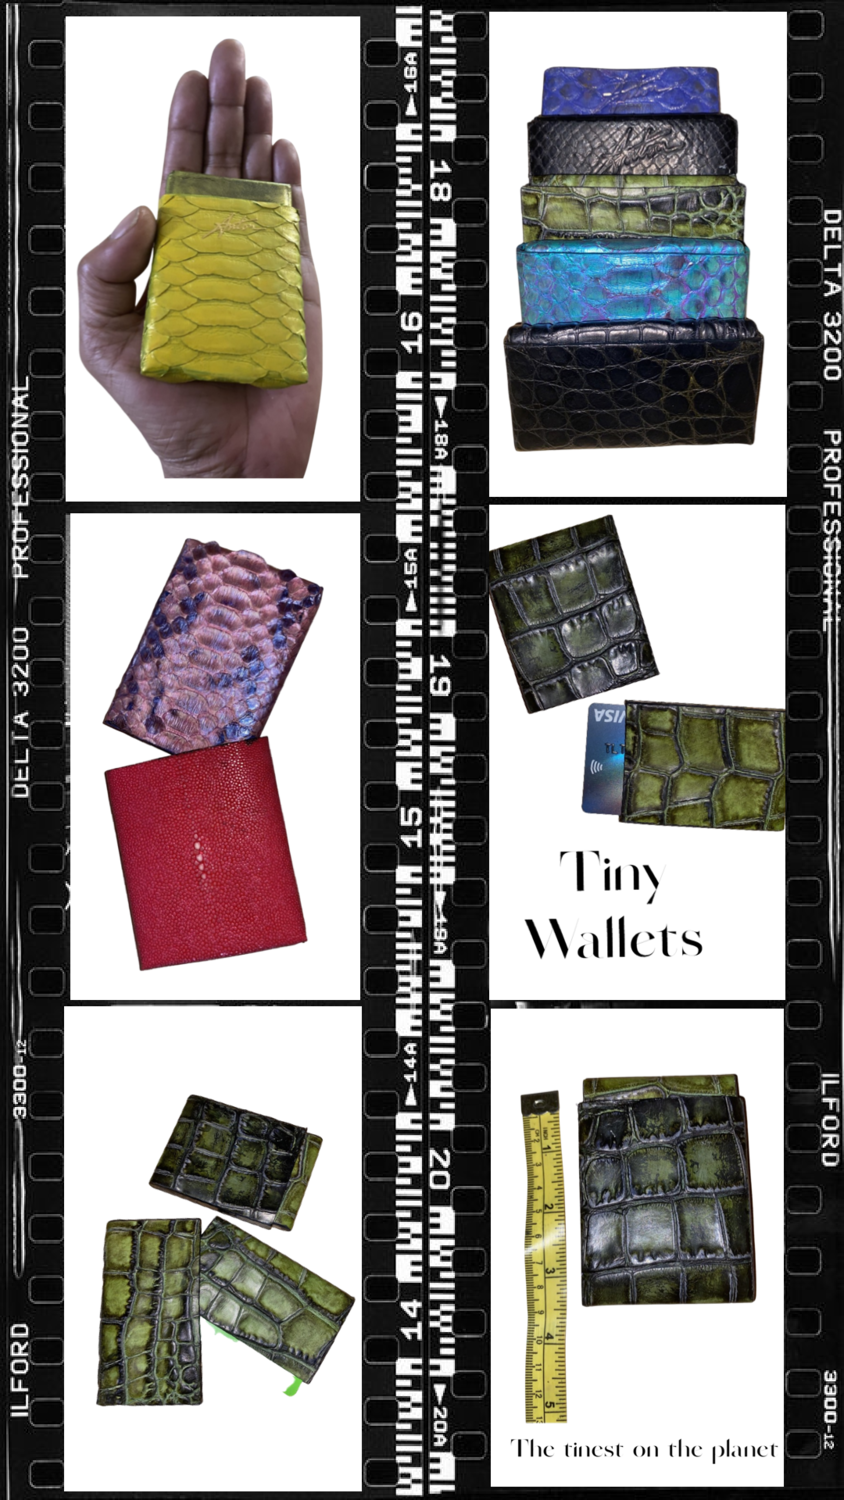 TINY WALLETS AND CARDHOLDERS